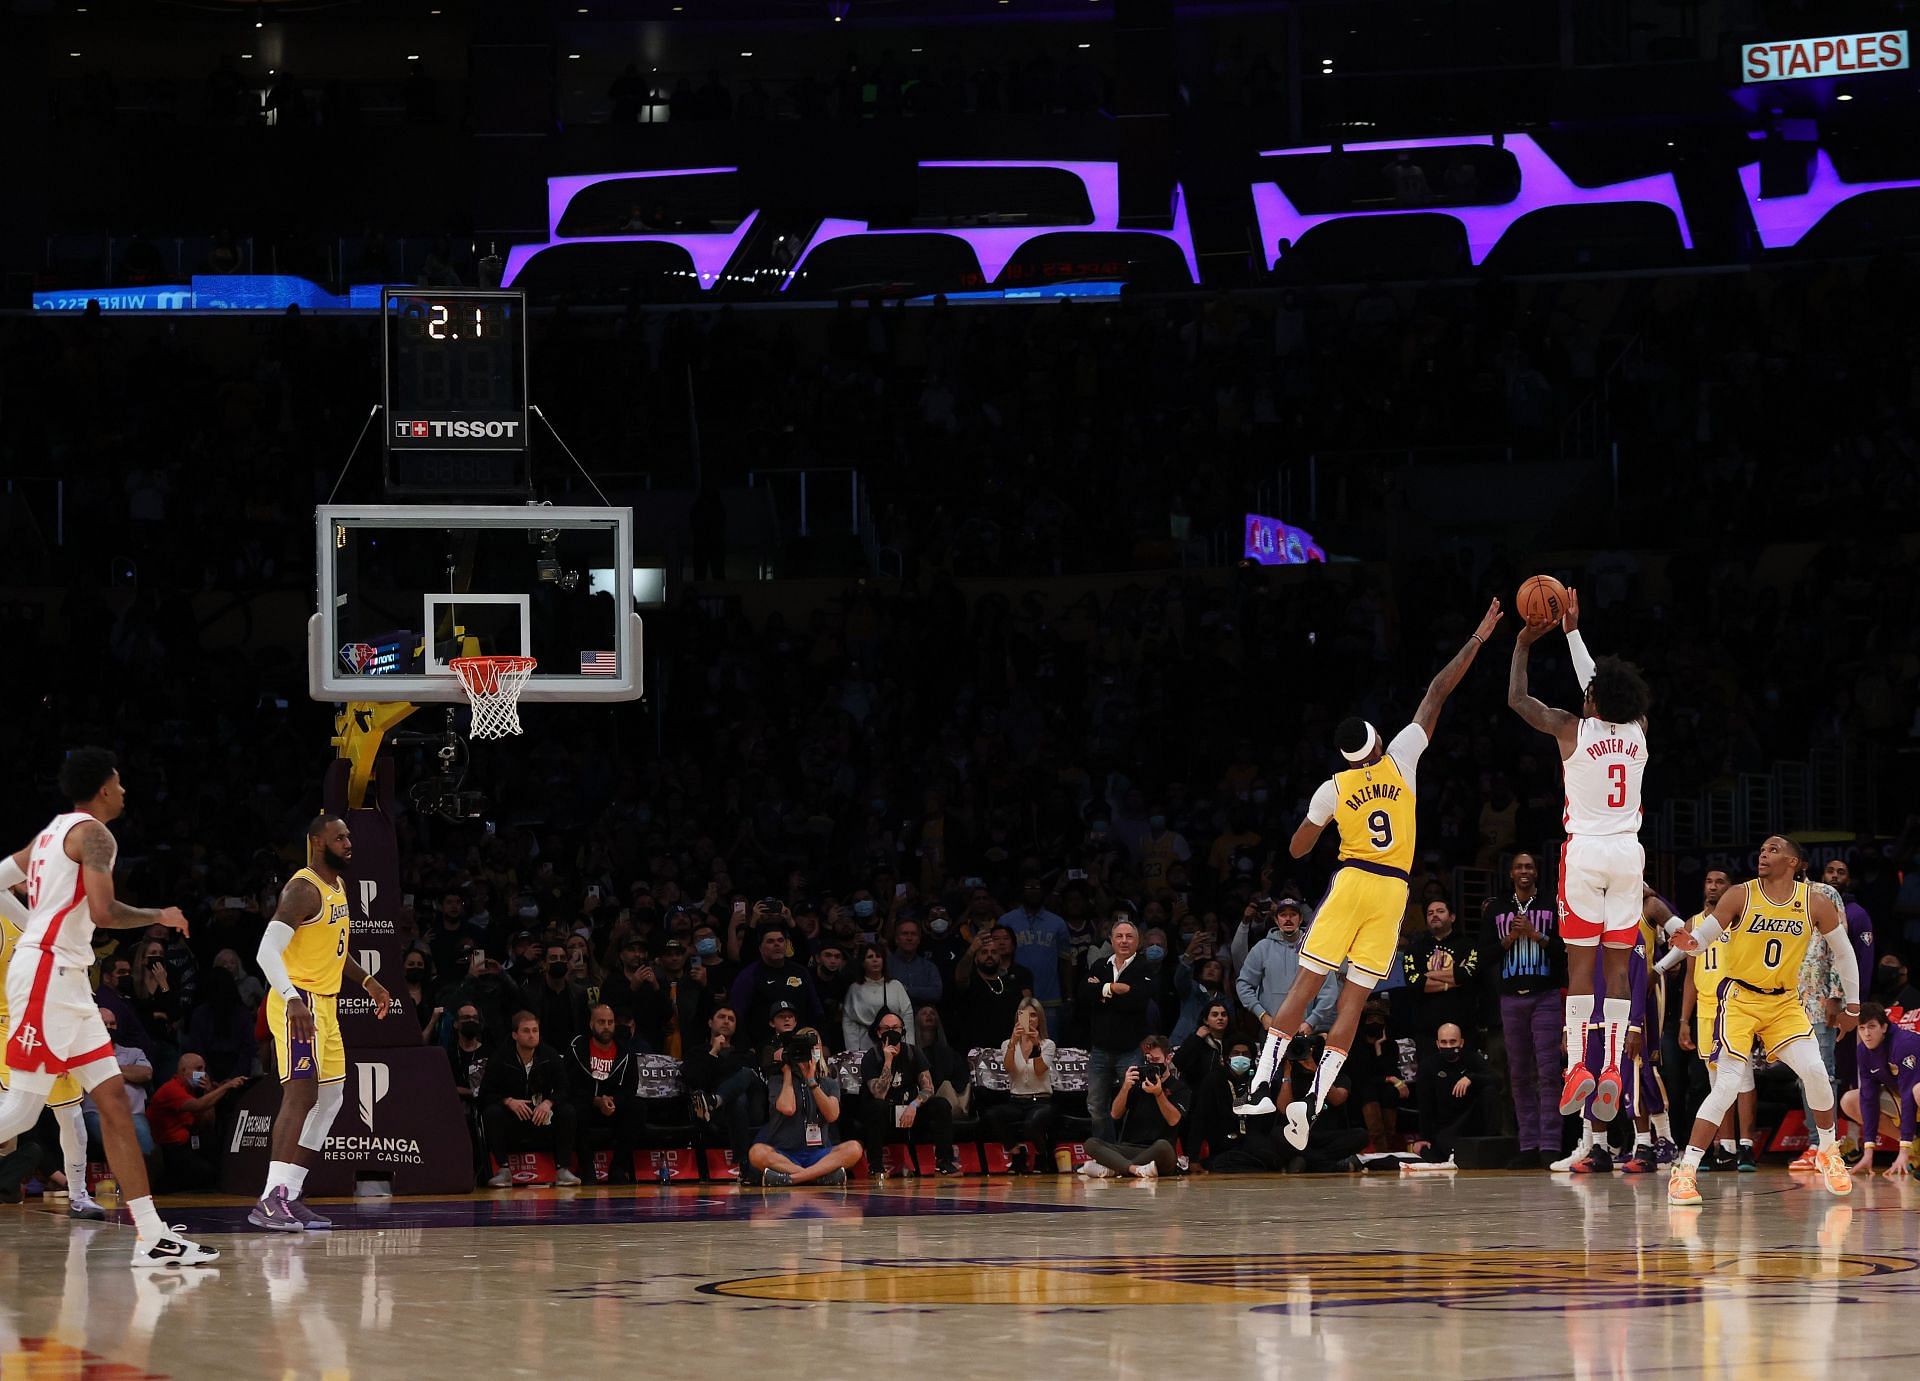 Kevin Porter Jr. of the Houston Rockets missed the potential game-winning basket against the LA Lakers